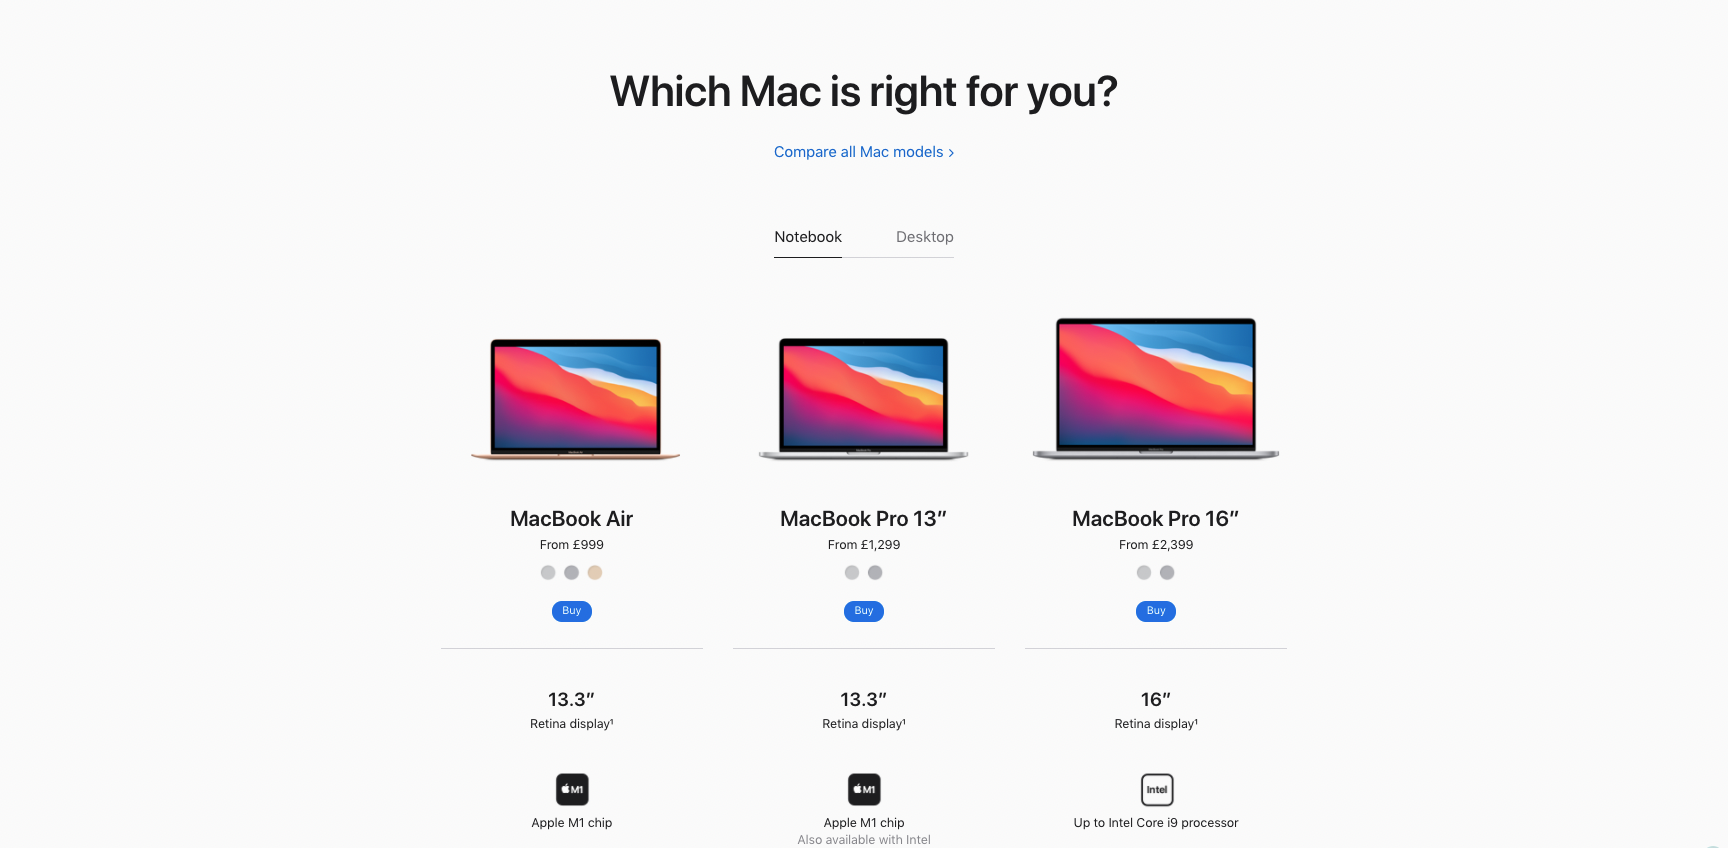 Basic Mac options shown, within the Notebook category, as a quick visual comparison of main characteristics and price.